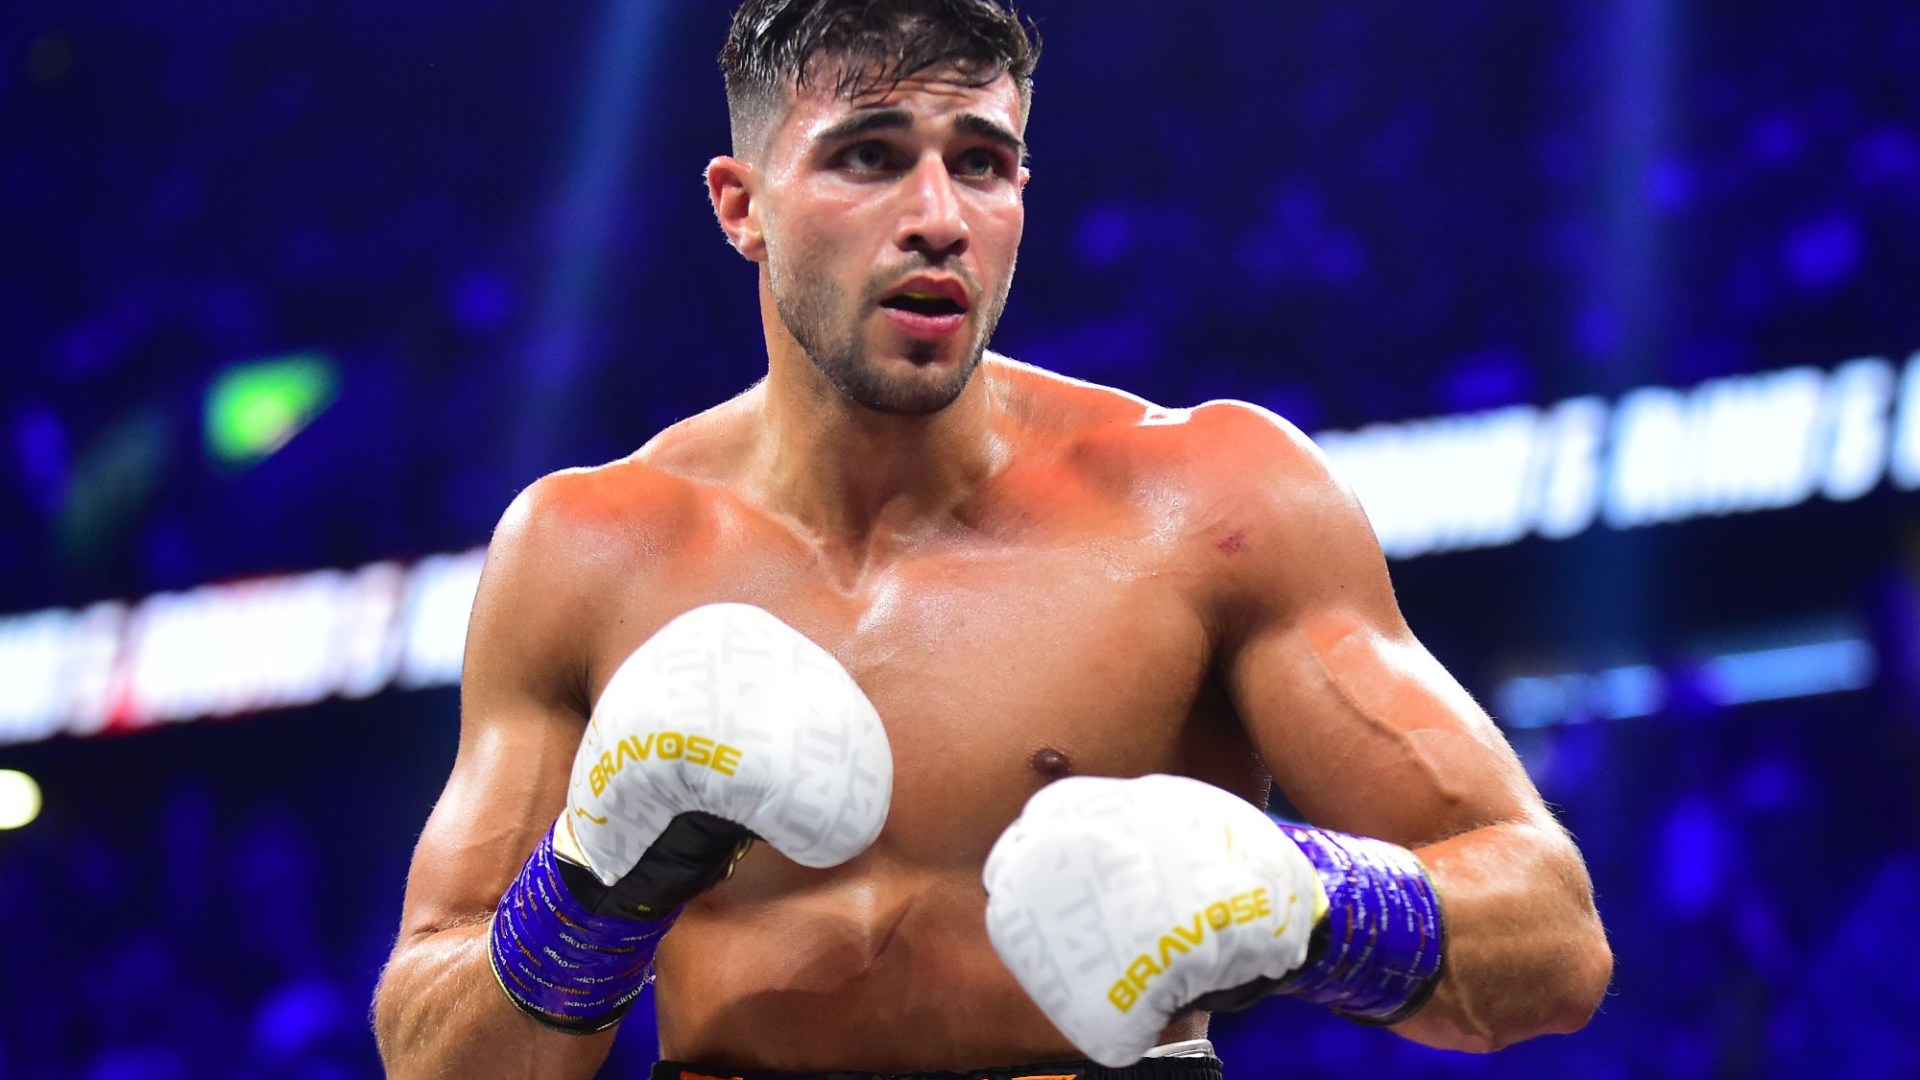 Tommy Fury in shock new career change as Love Island star and boxer ‘achieves massive goal’ [Video]